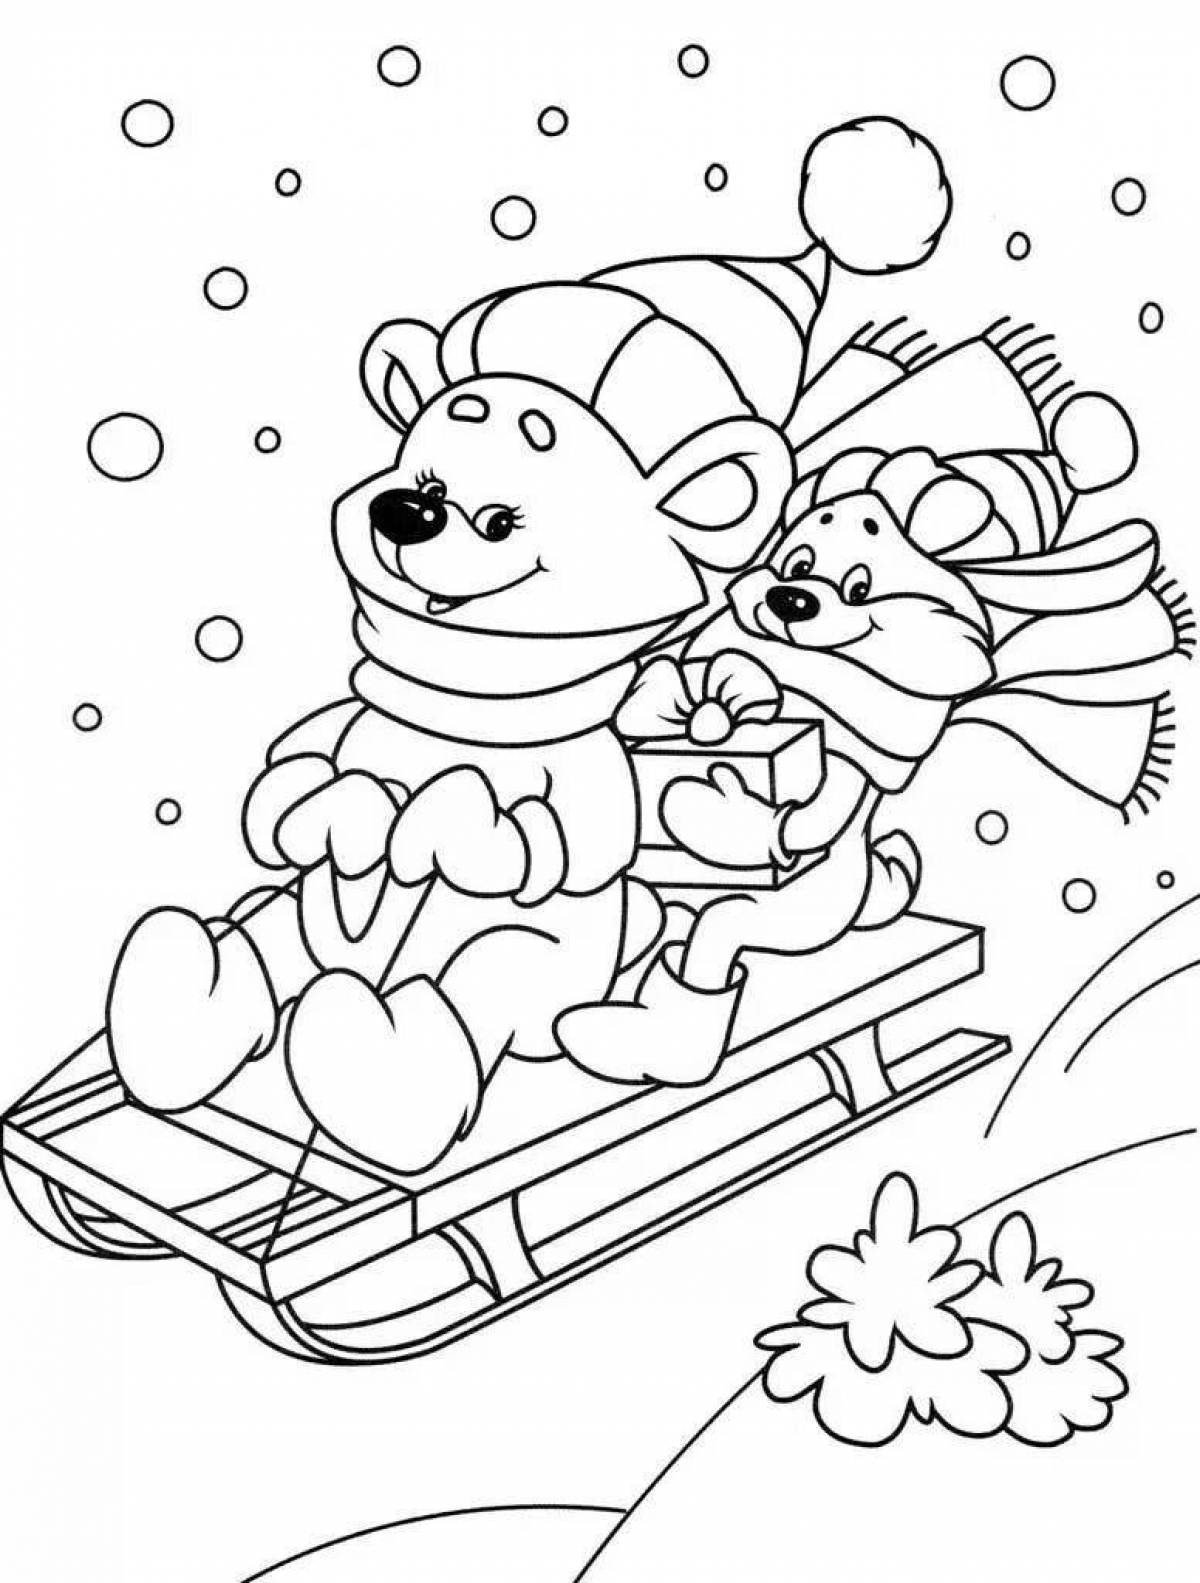 Large winter coloring book for children 6-7 years old